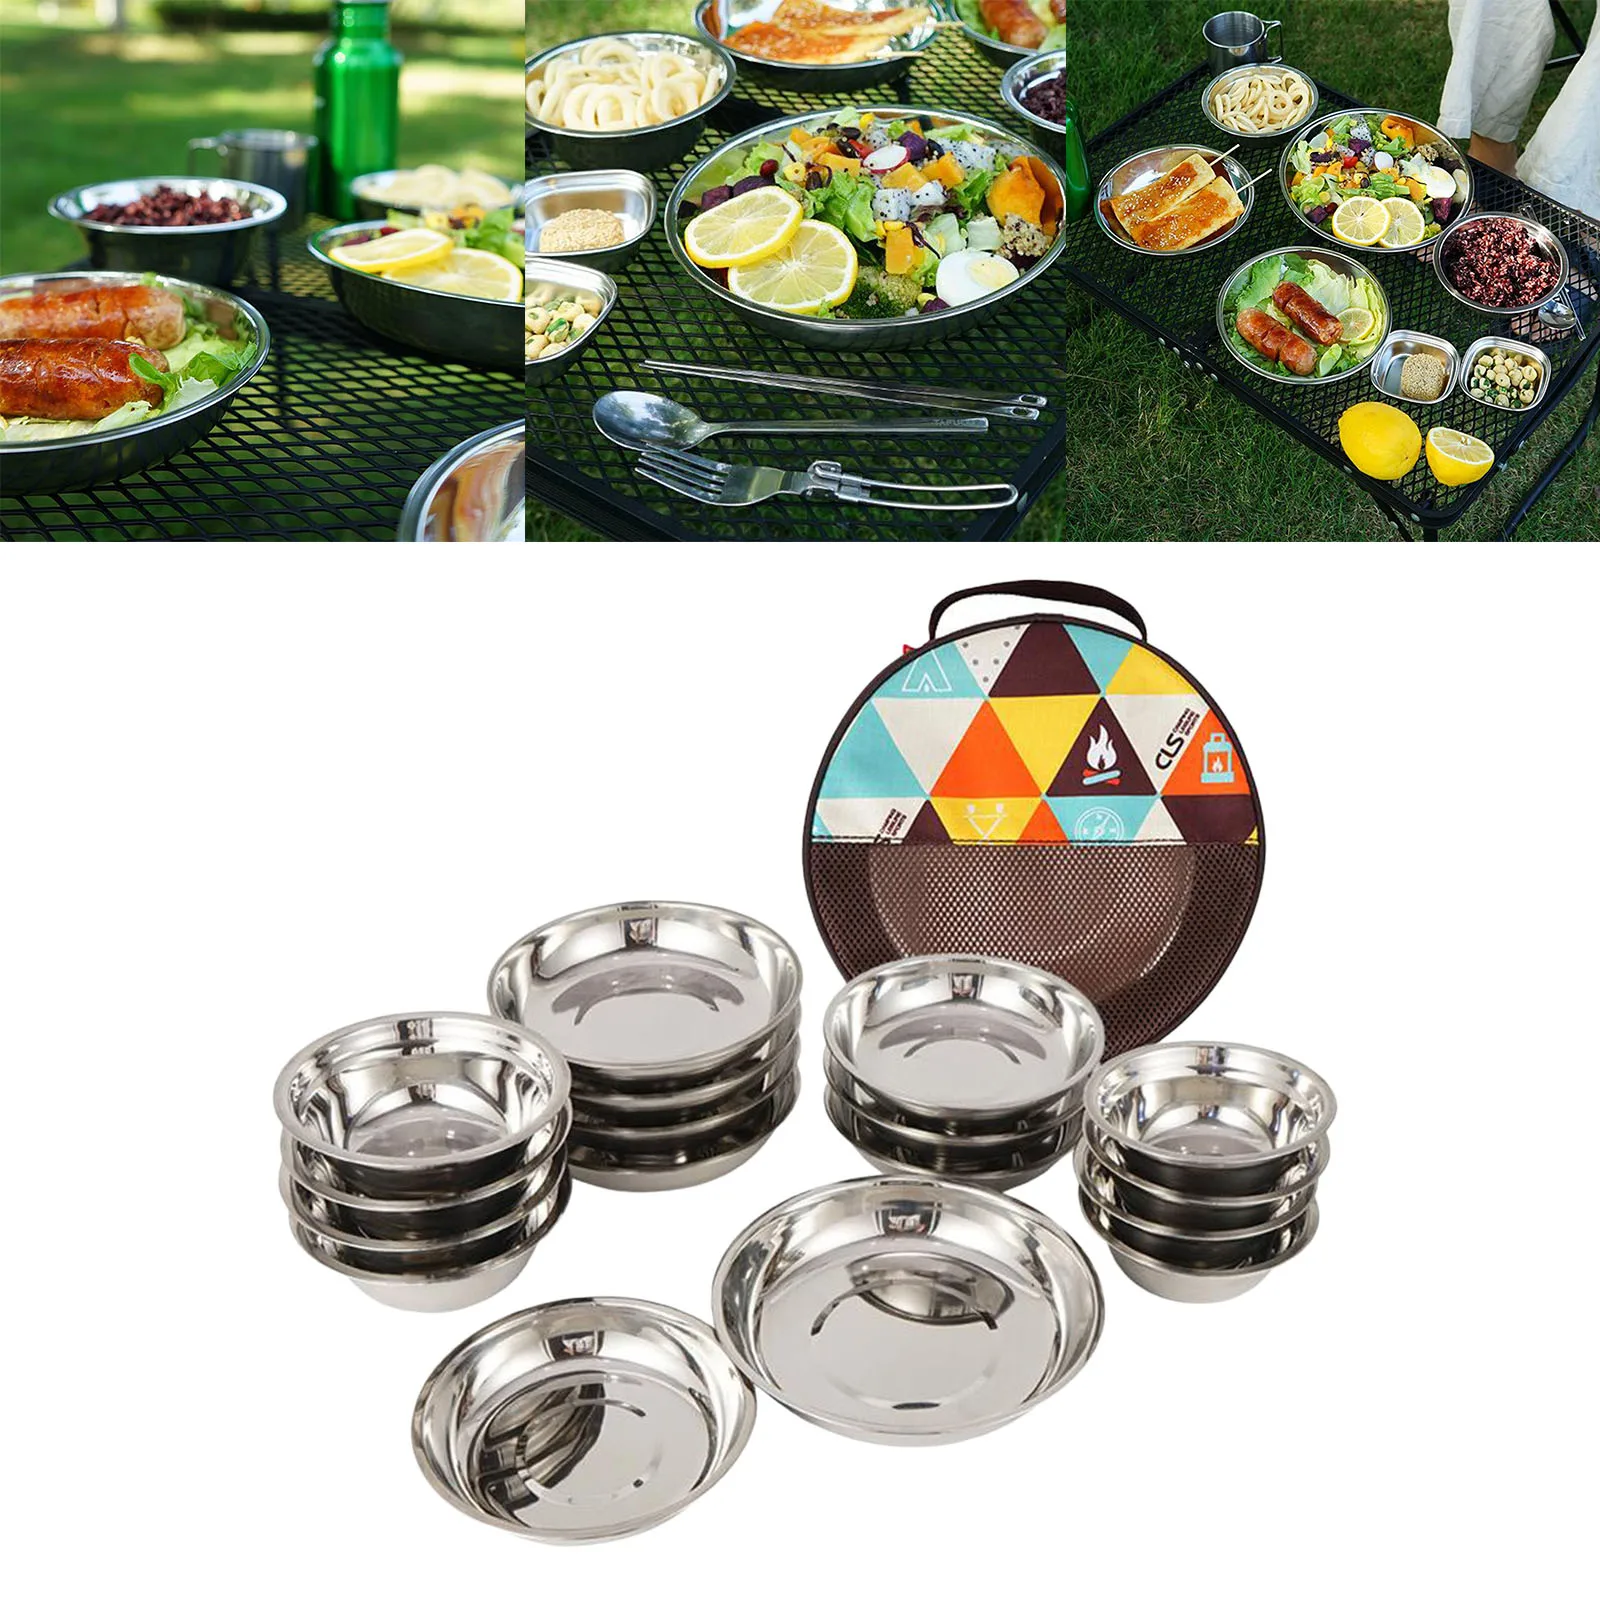 1 Set of 17Pcs Camping Mess Kit Outdoor Tableware Stainless Steel Plate Bowl with Storage Bag for Hiking Travel Picnic